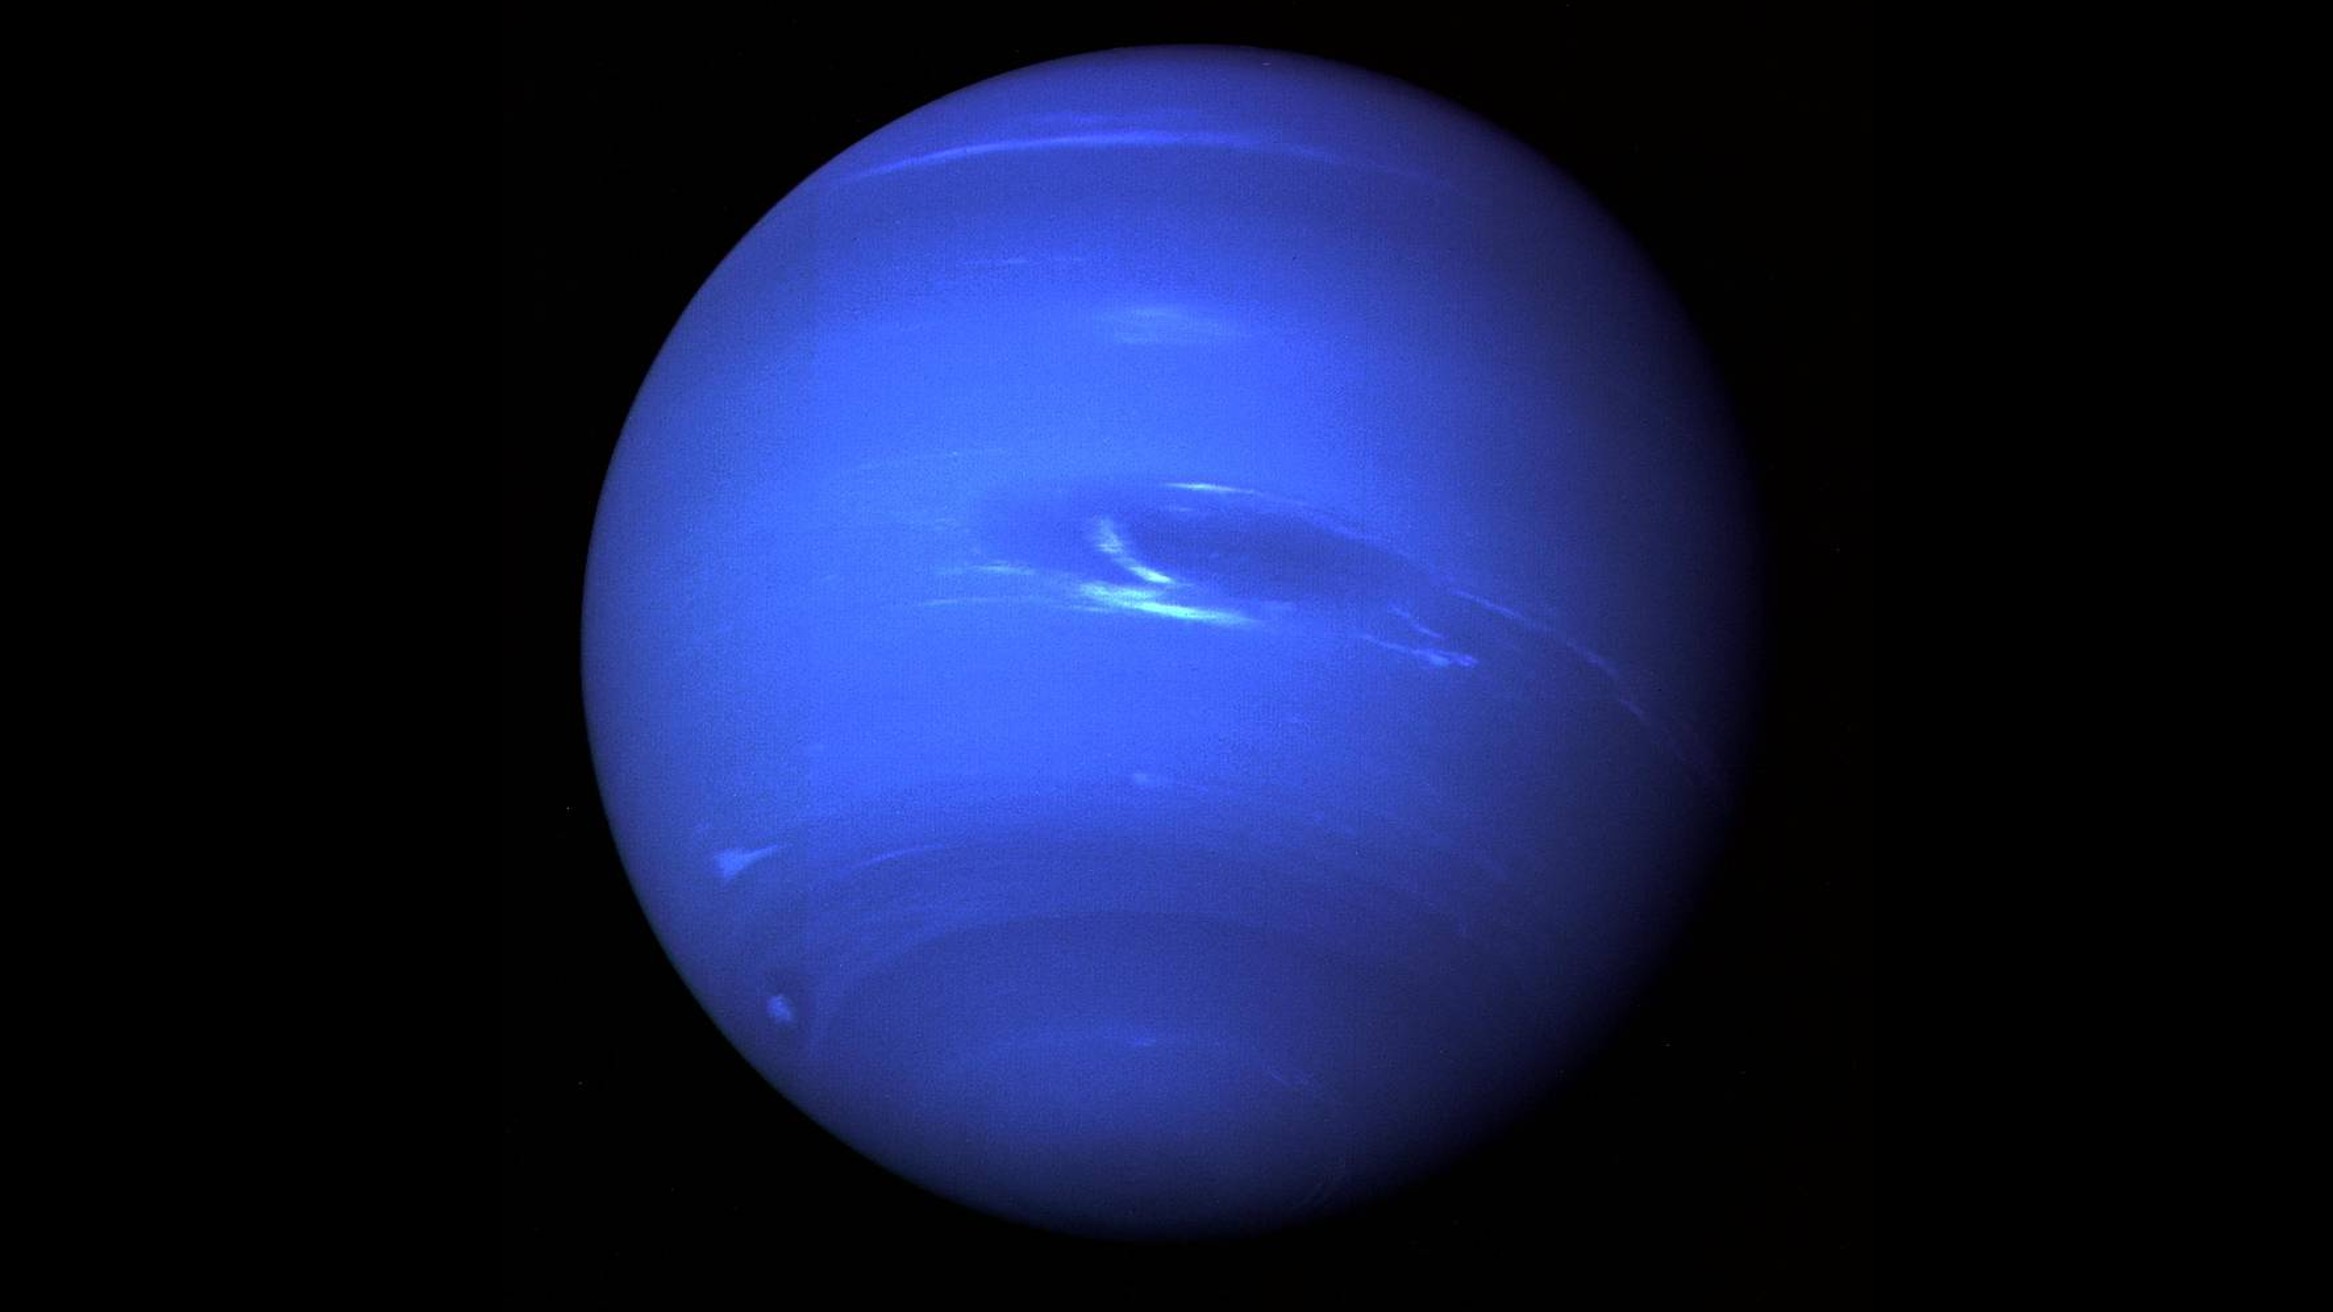 Voyager 2 snapped this close up shot of a blue windy Neptune back in 1989